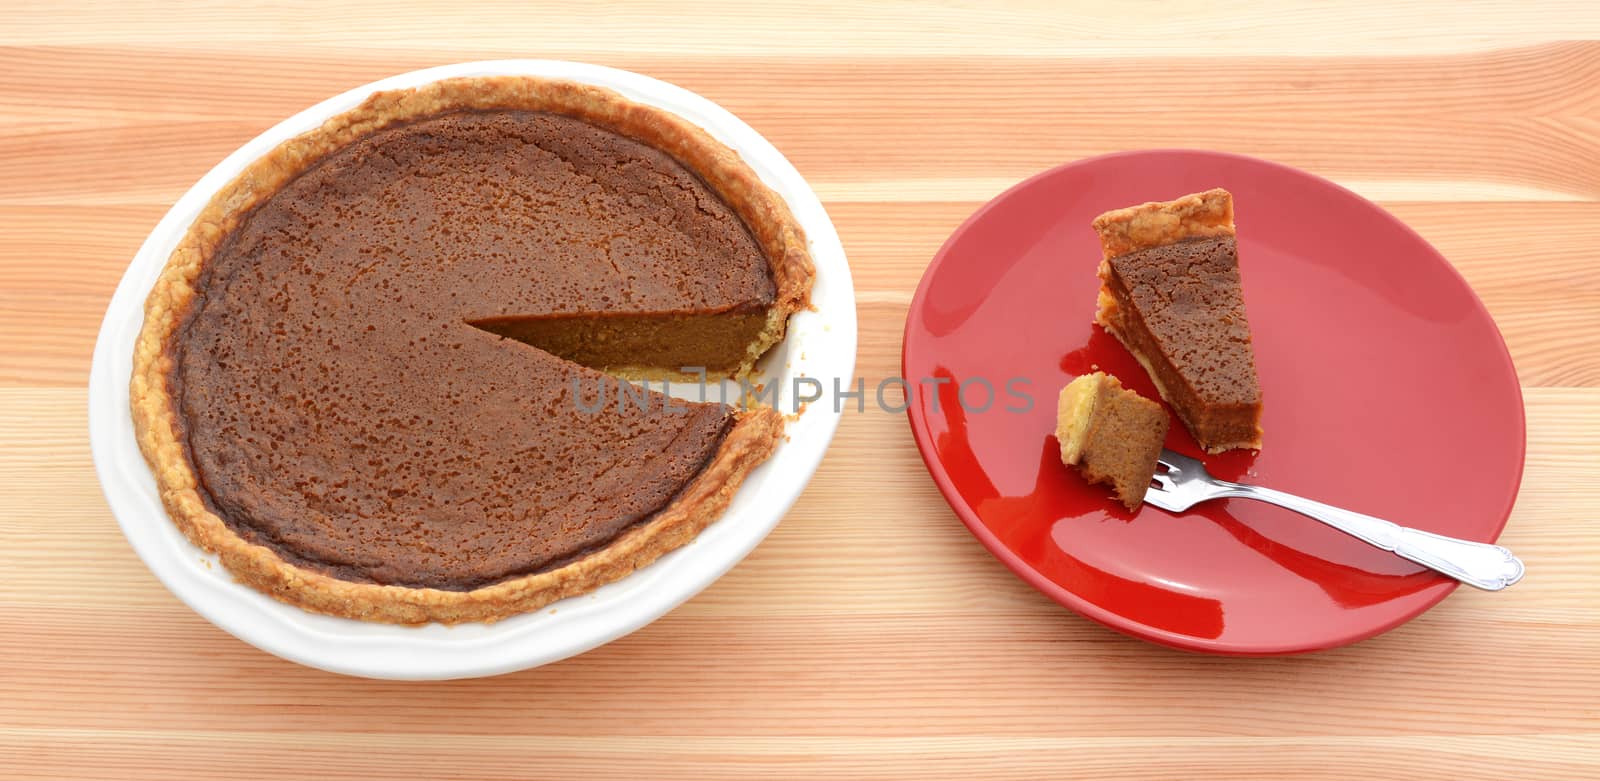 Pumpkin pie for Thanksgiving - a slice on a red plate with a bite ready on the fork